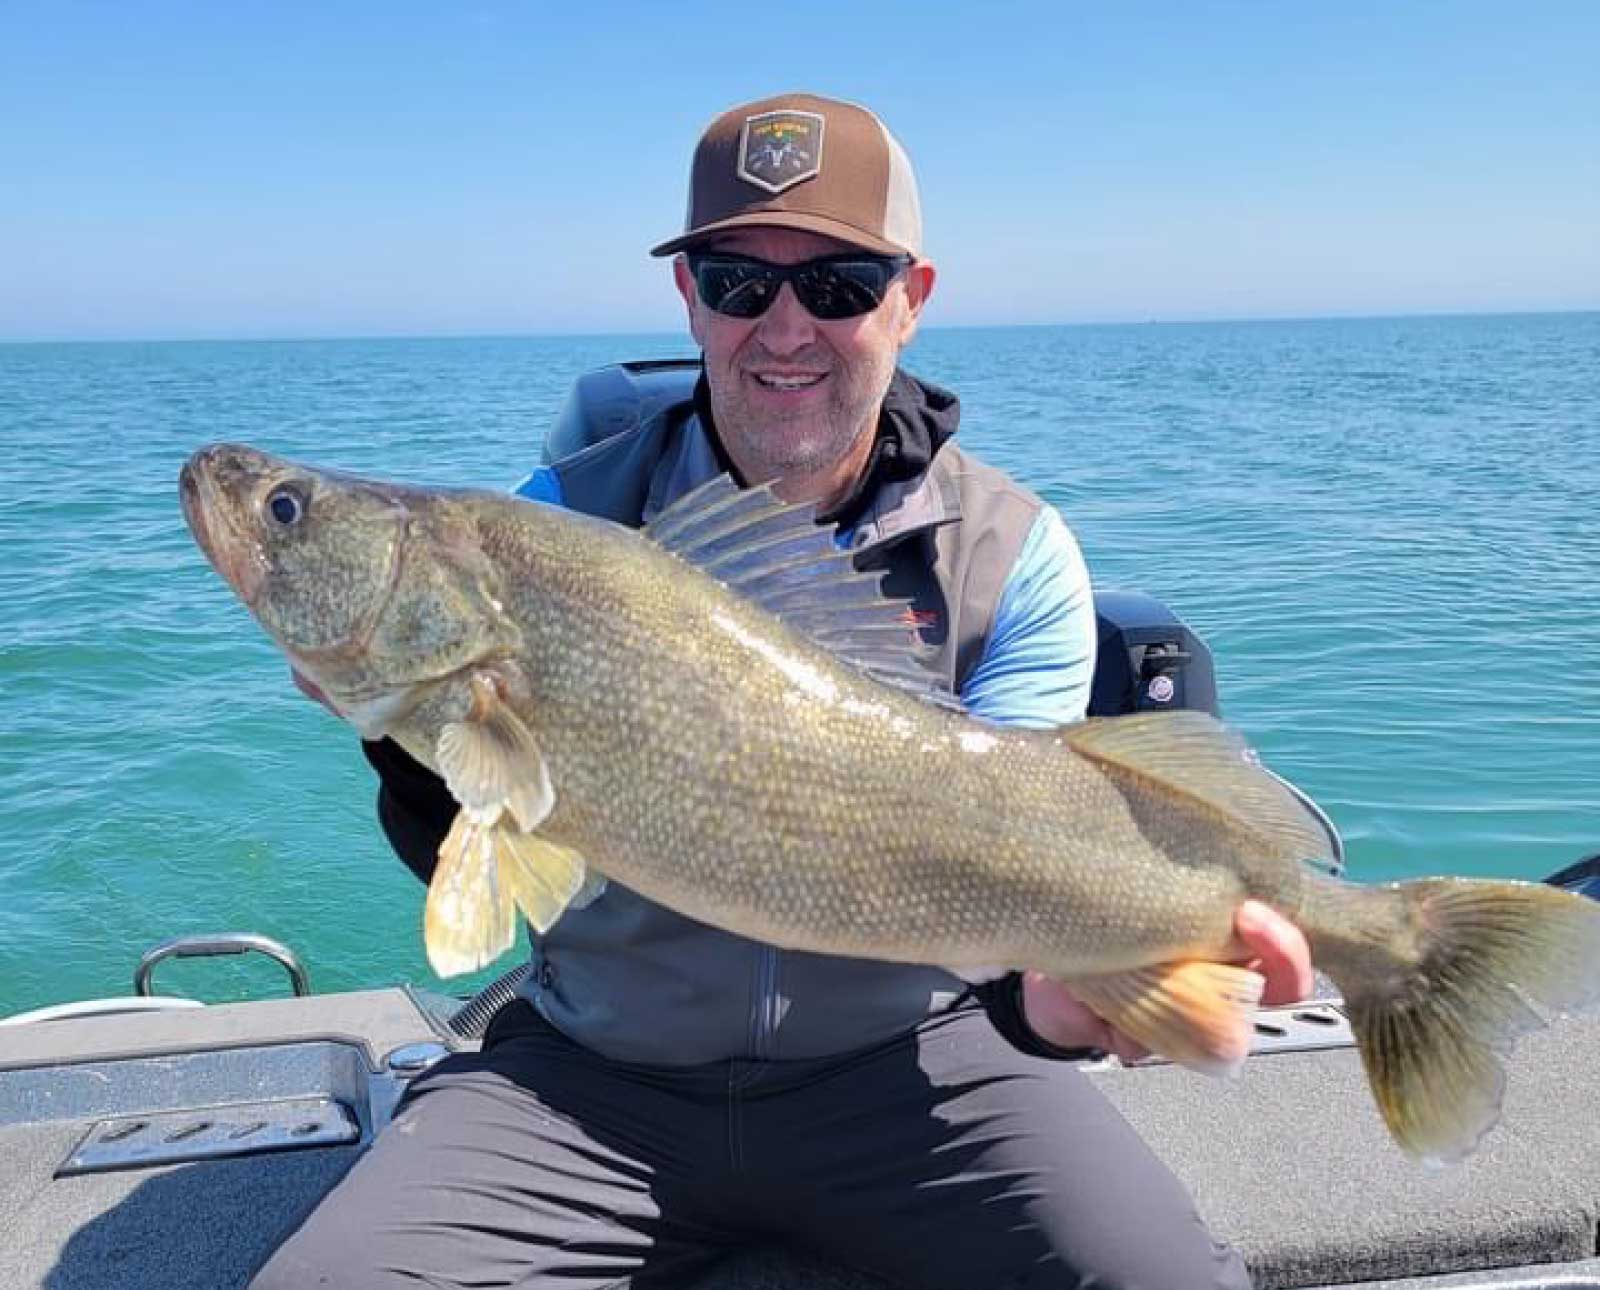 Lake Erie Fishing Guides - Best 5 Lake Erie Fishing Charters